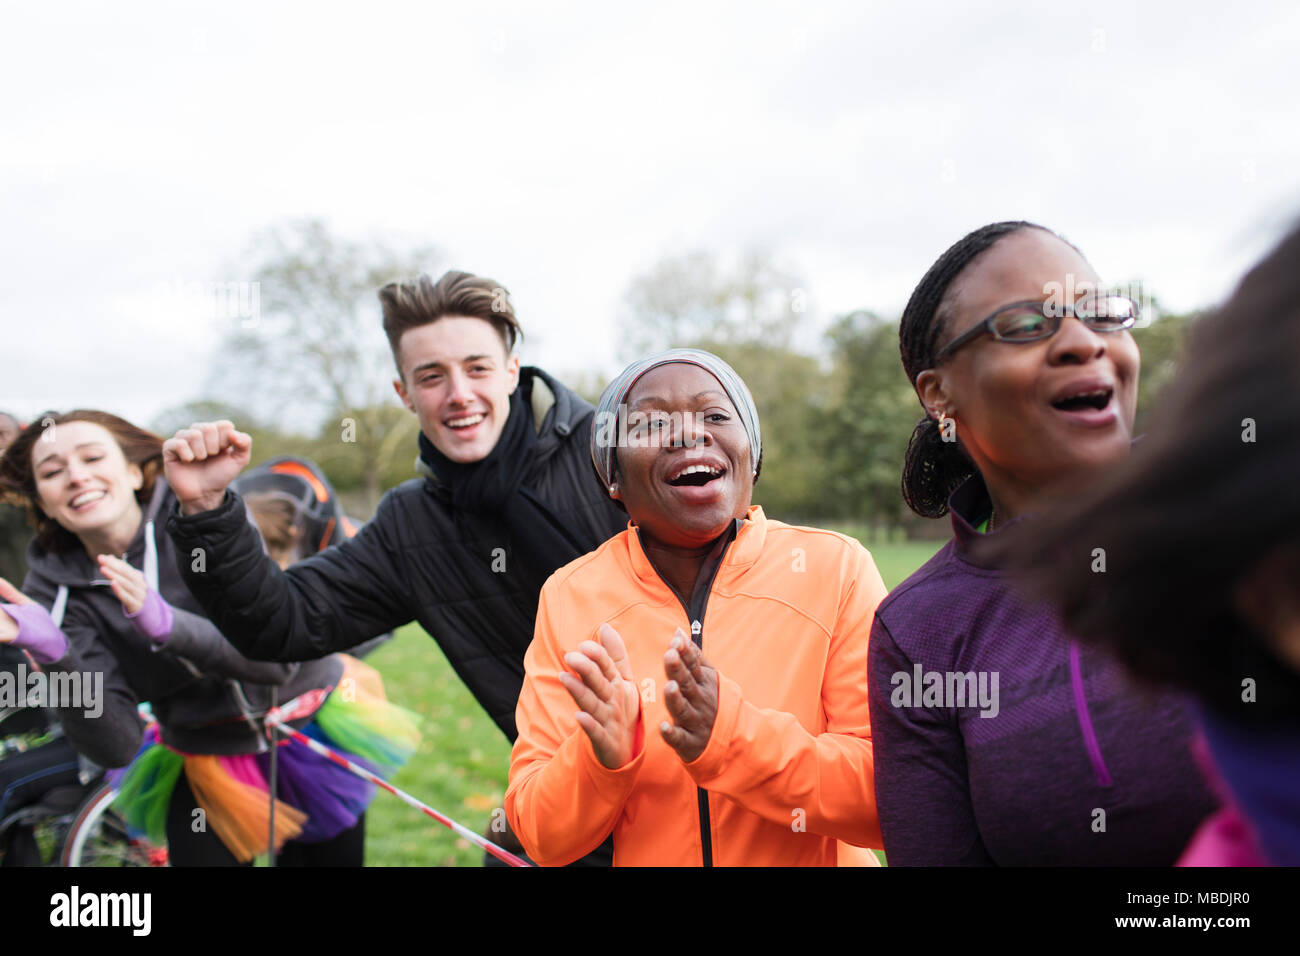 Enthusiastic spectators cheering at charity run in park Stock Photo